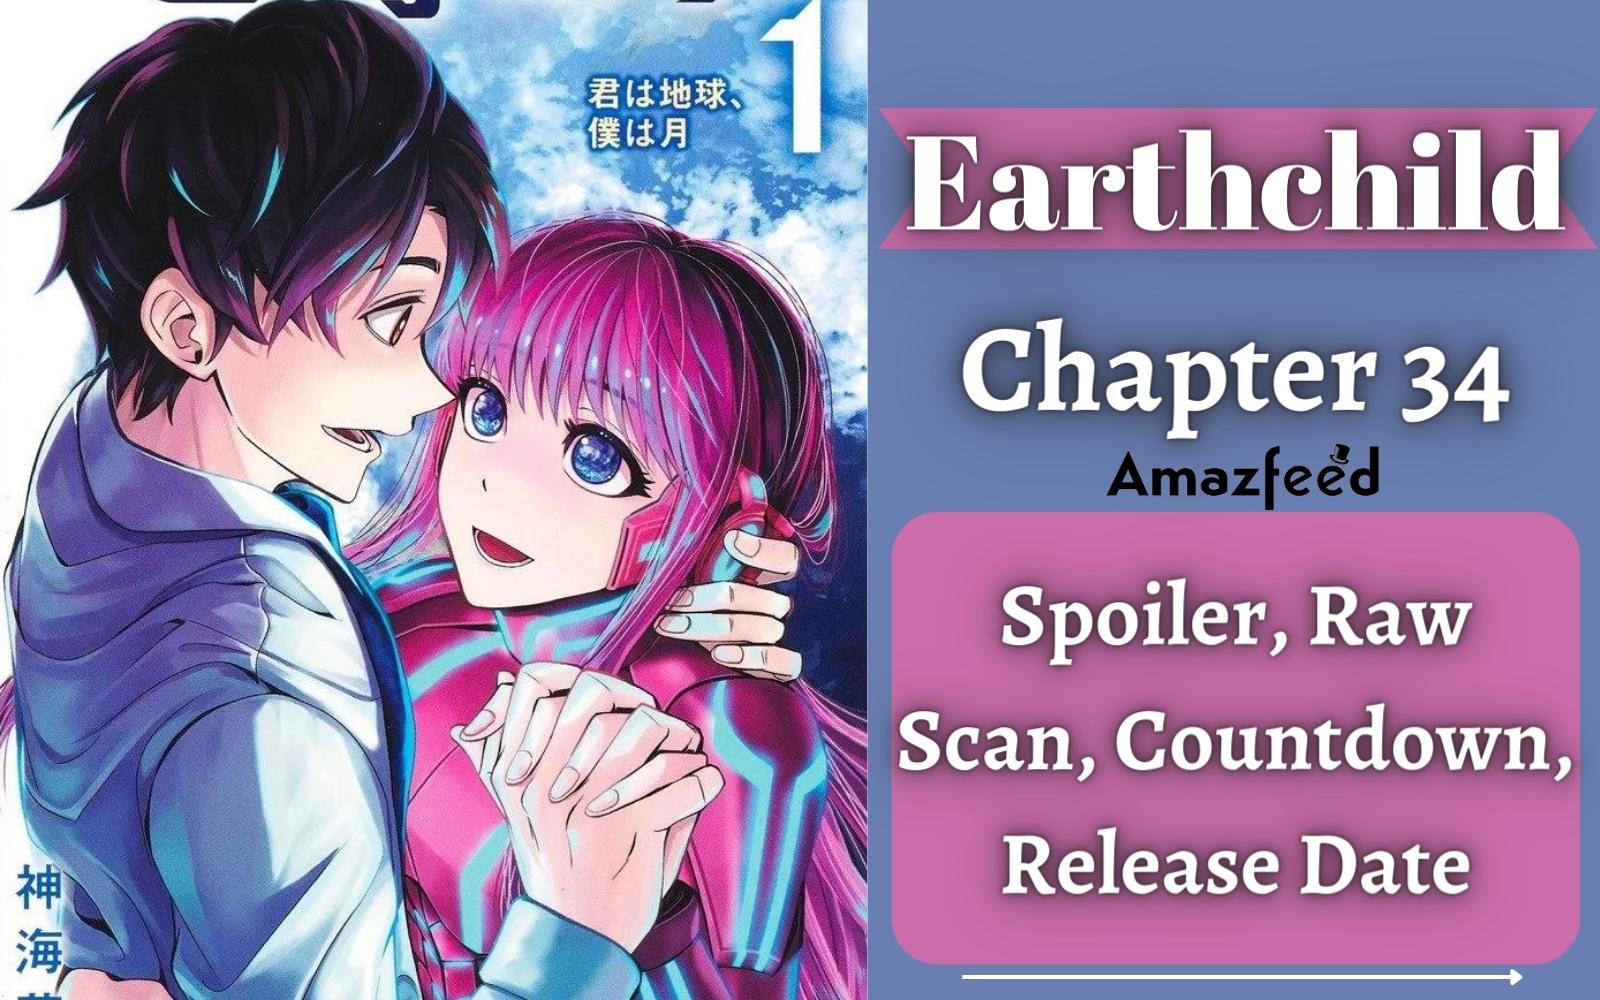 Earthchild Chapter 34 Spoiler, Release Date, Raw Scan, Count Down Everything we know so far